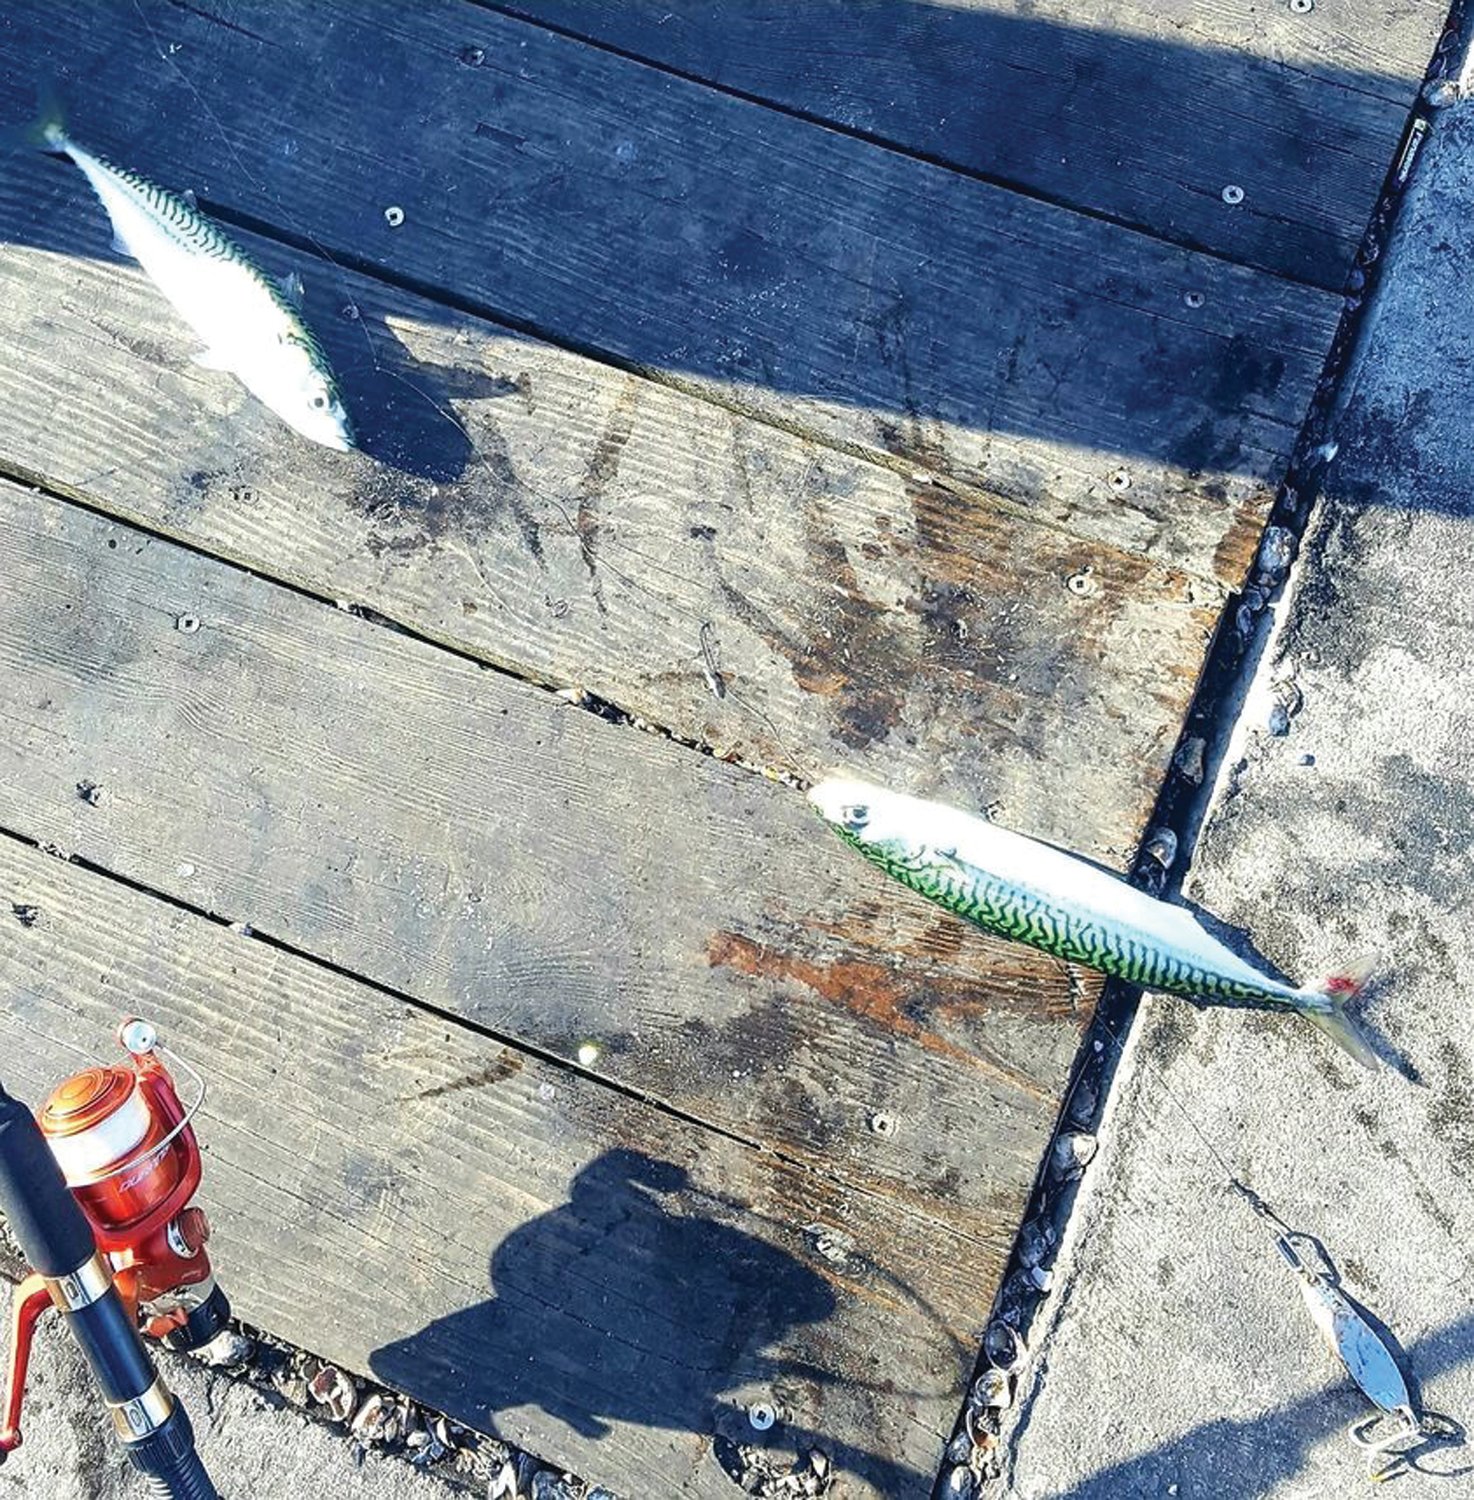 MACKEREL IN NEWPORT: Angler John Migliori said, “The mackerel are here in Newport. I caught many mackerel mixed in with a few herring which are hitting real good too.”